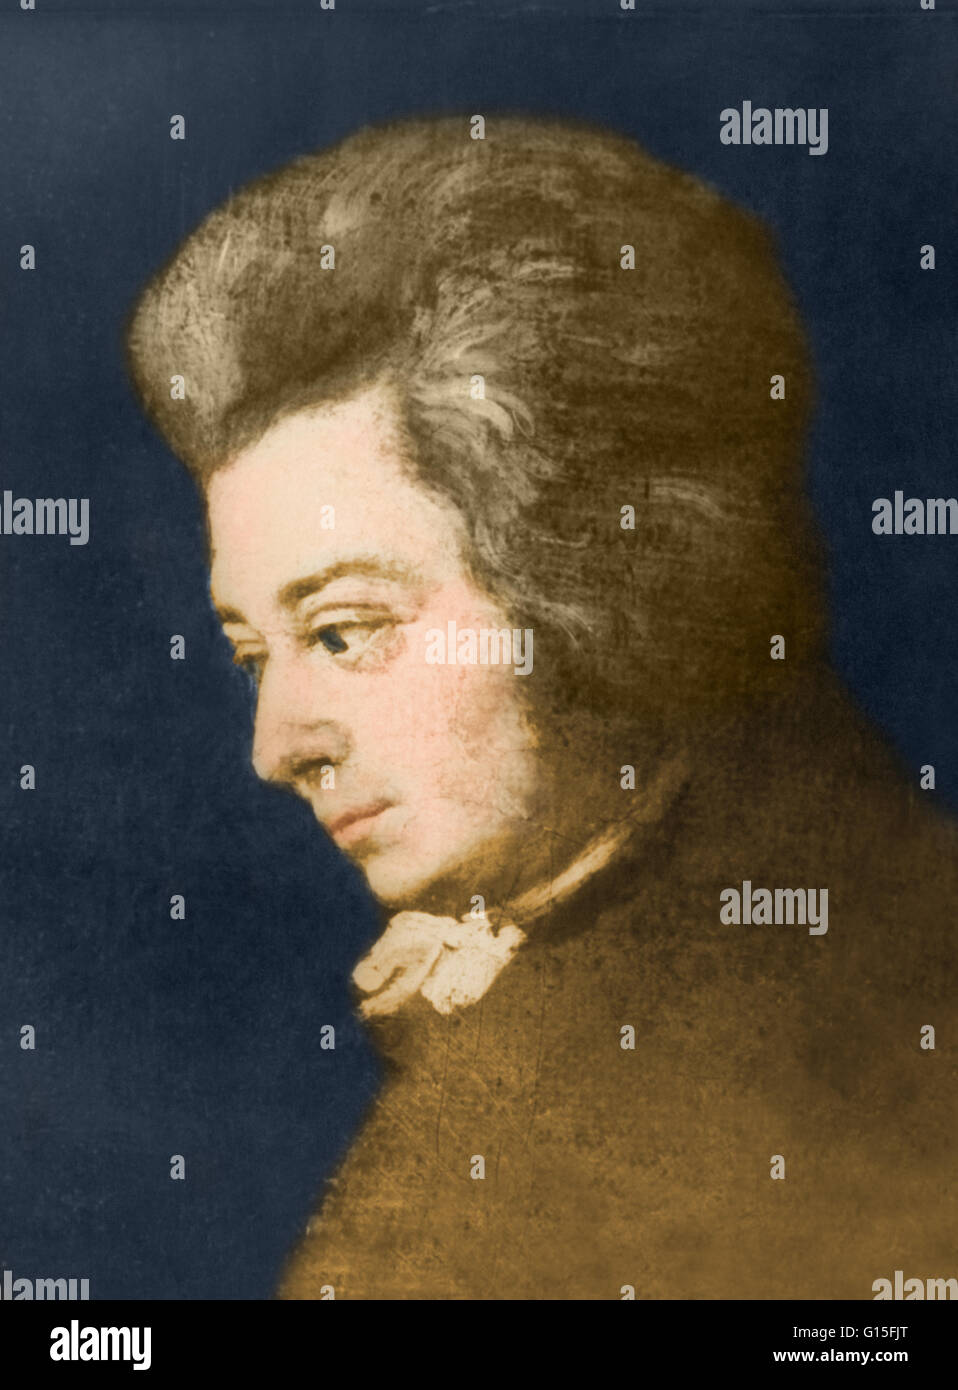 Wolfgang Amadeus Mozart; portrait by Joseph Lange, (1783). The original hangs in the Mozarteum. Wolfgang Amadeus Mozart (January 27, 1756 - December 5, 1791) was a prolific and influential composer of the Classical era. He composed over 600 works, many ac Stock Photo